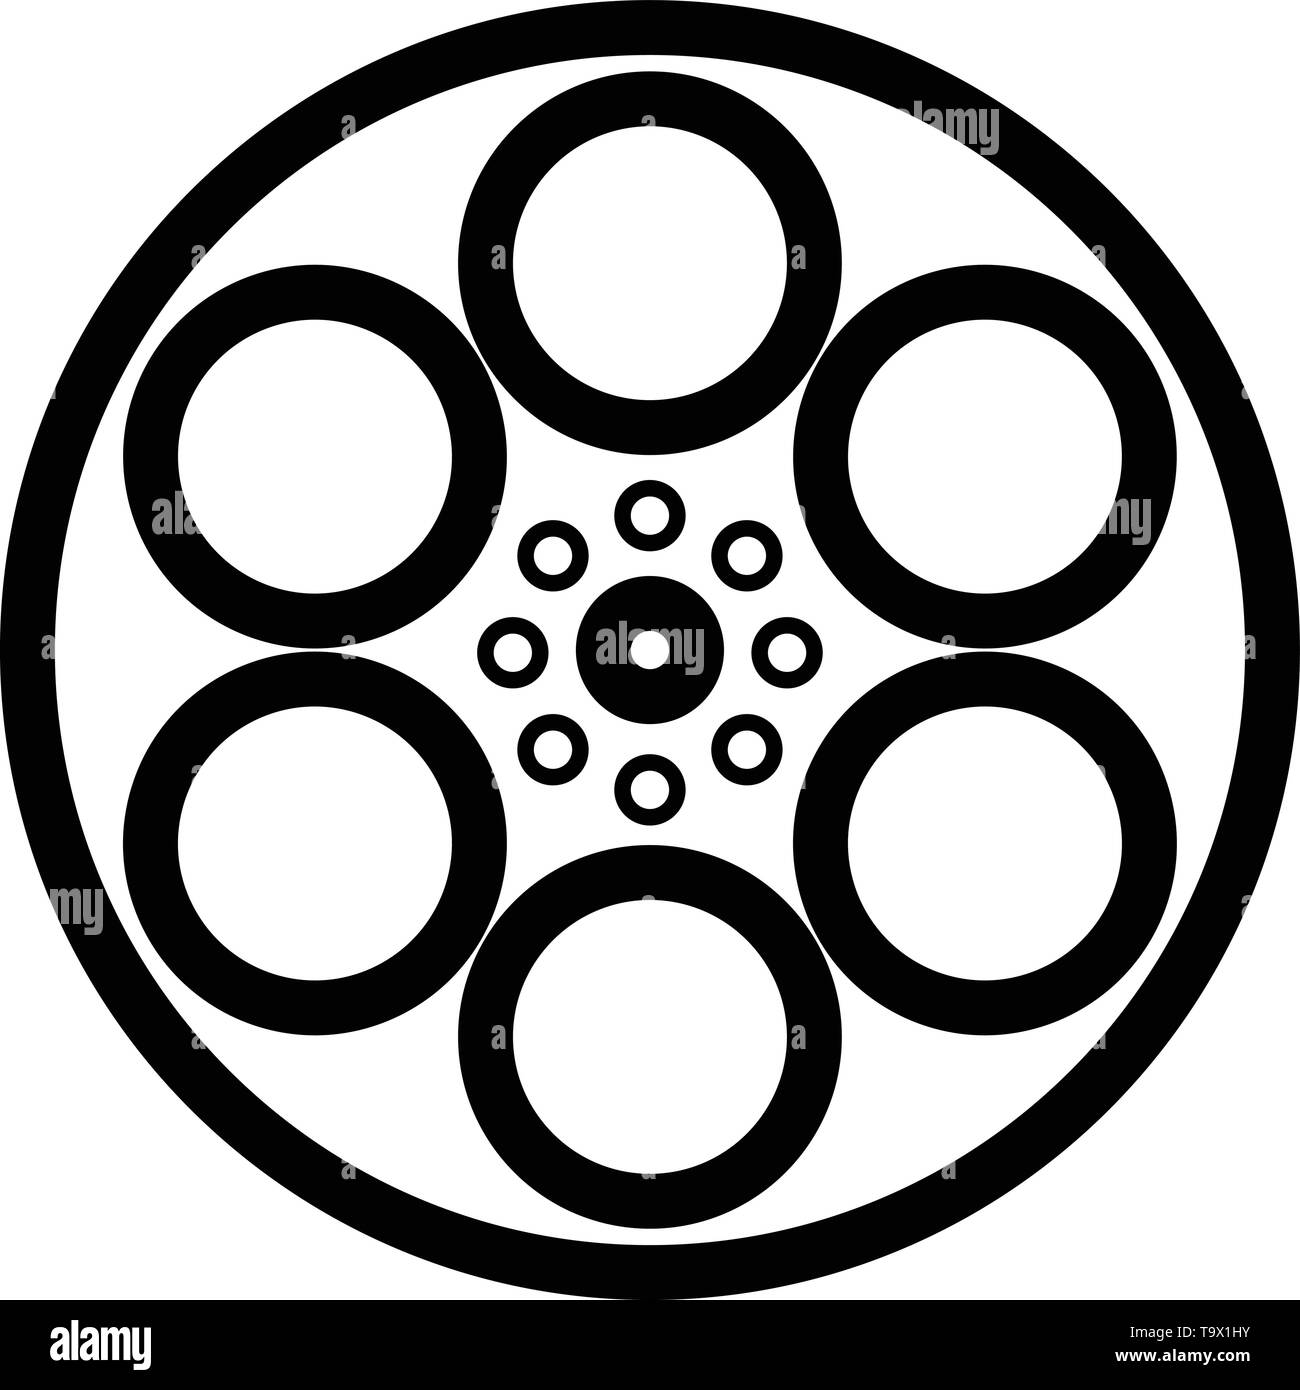 Movie reel Black and White Stock Photos & Images - Alamy